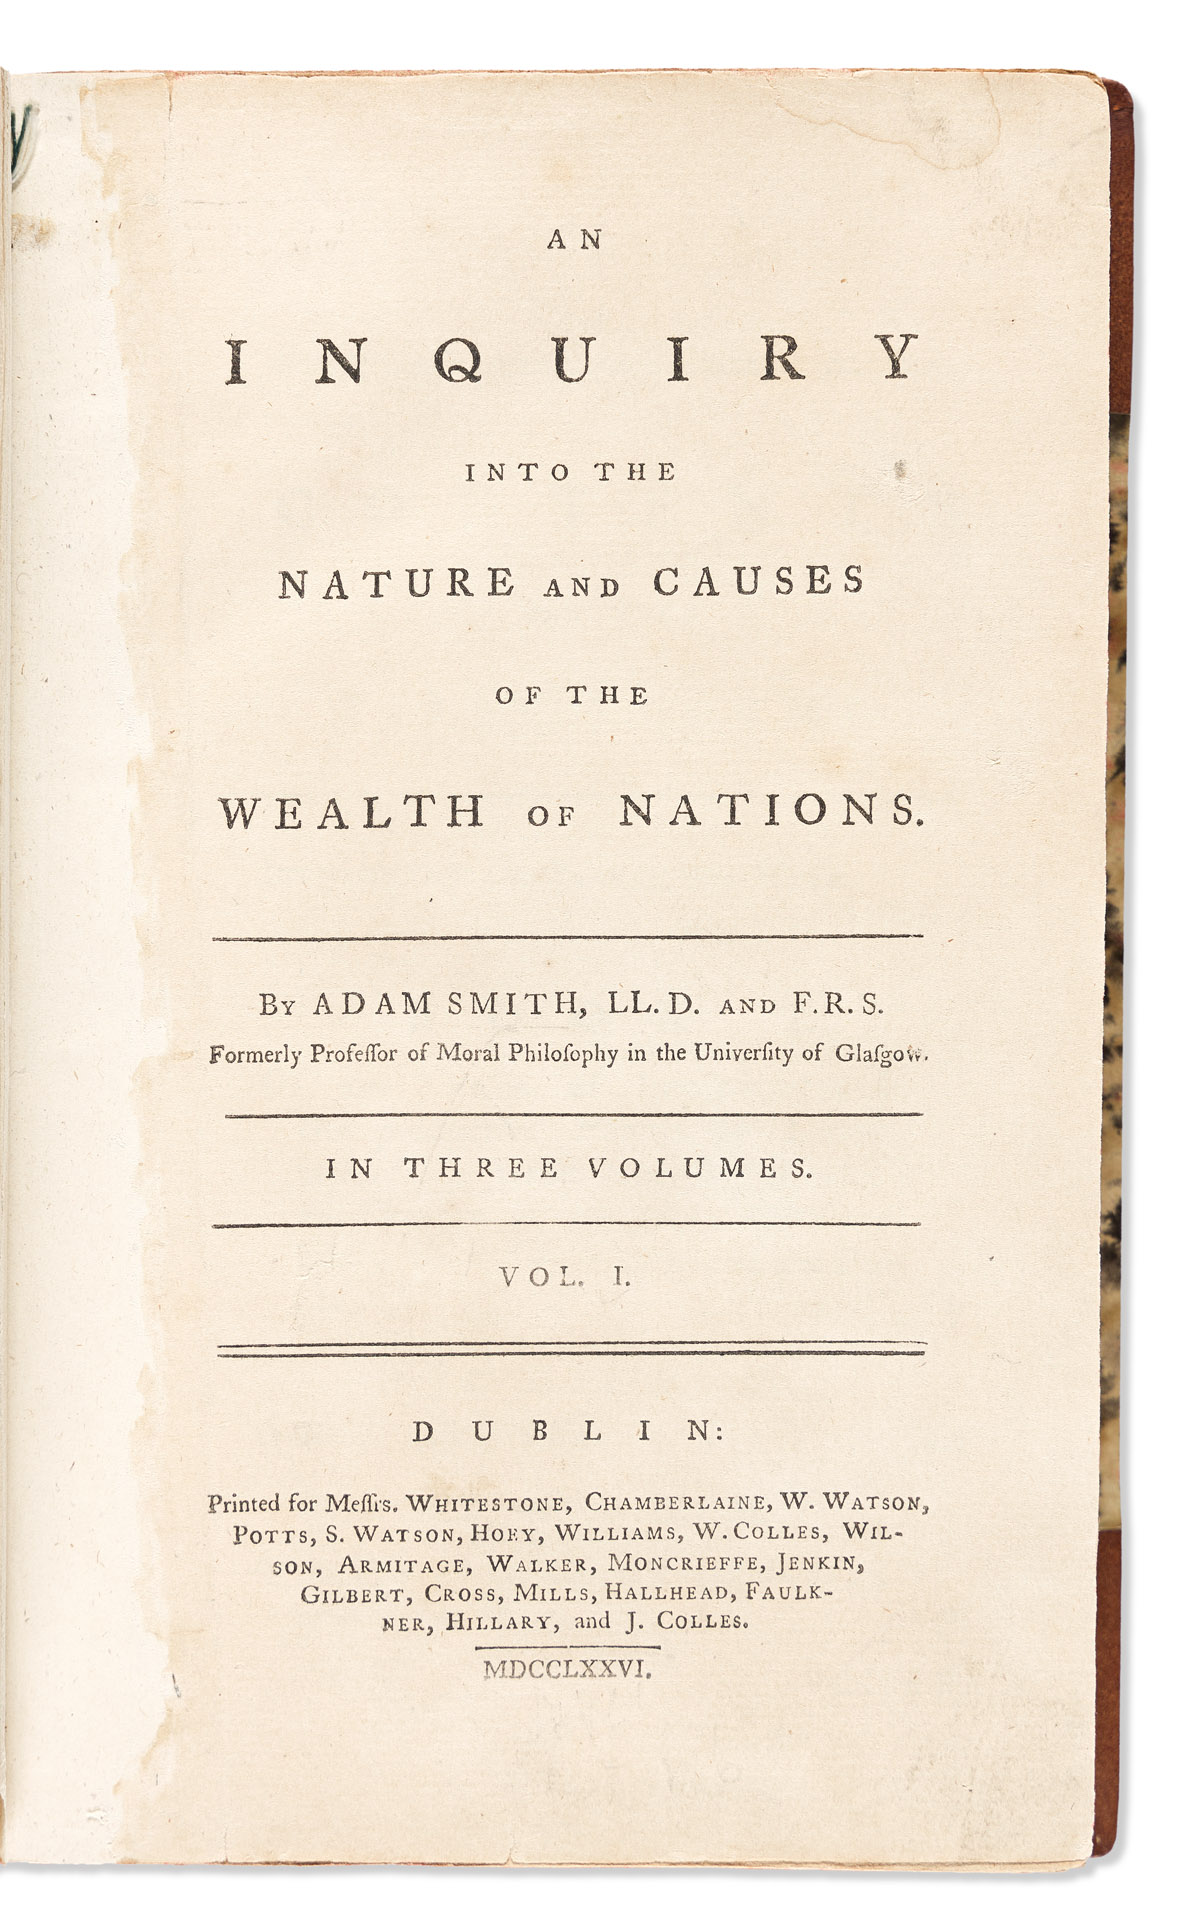 [Economics] Smith, Adam (1723-1790) An Inquiry into the Nature and Causes of the Wealth of Nations.